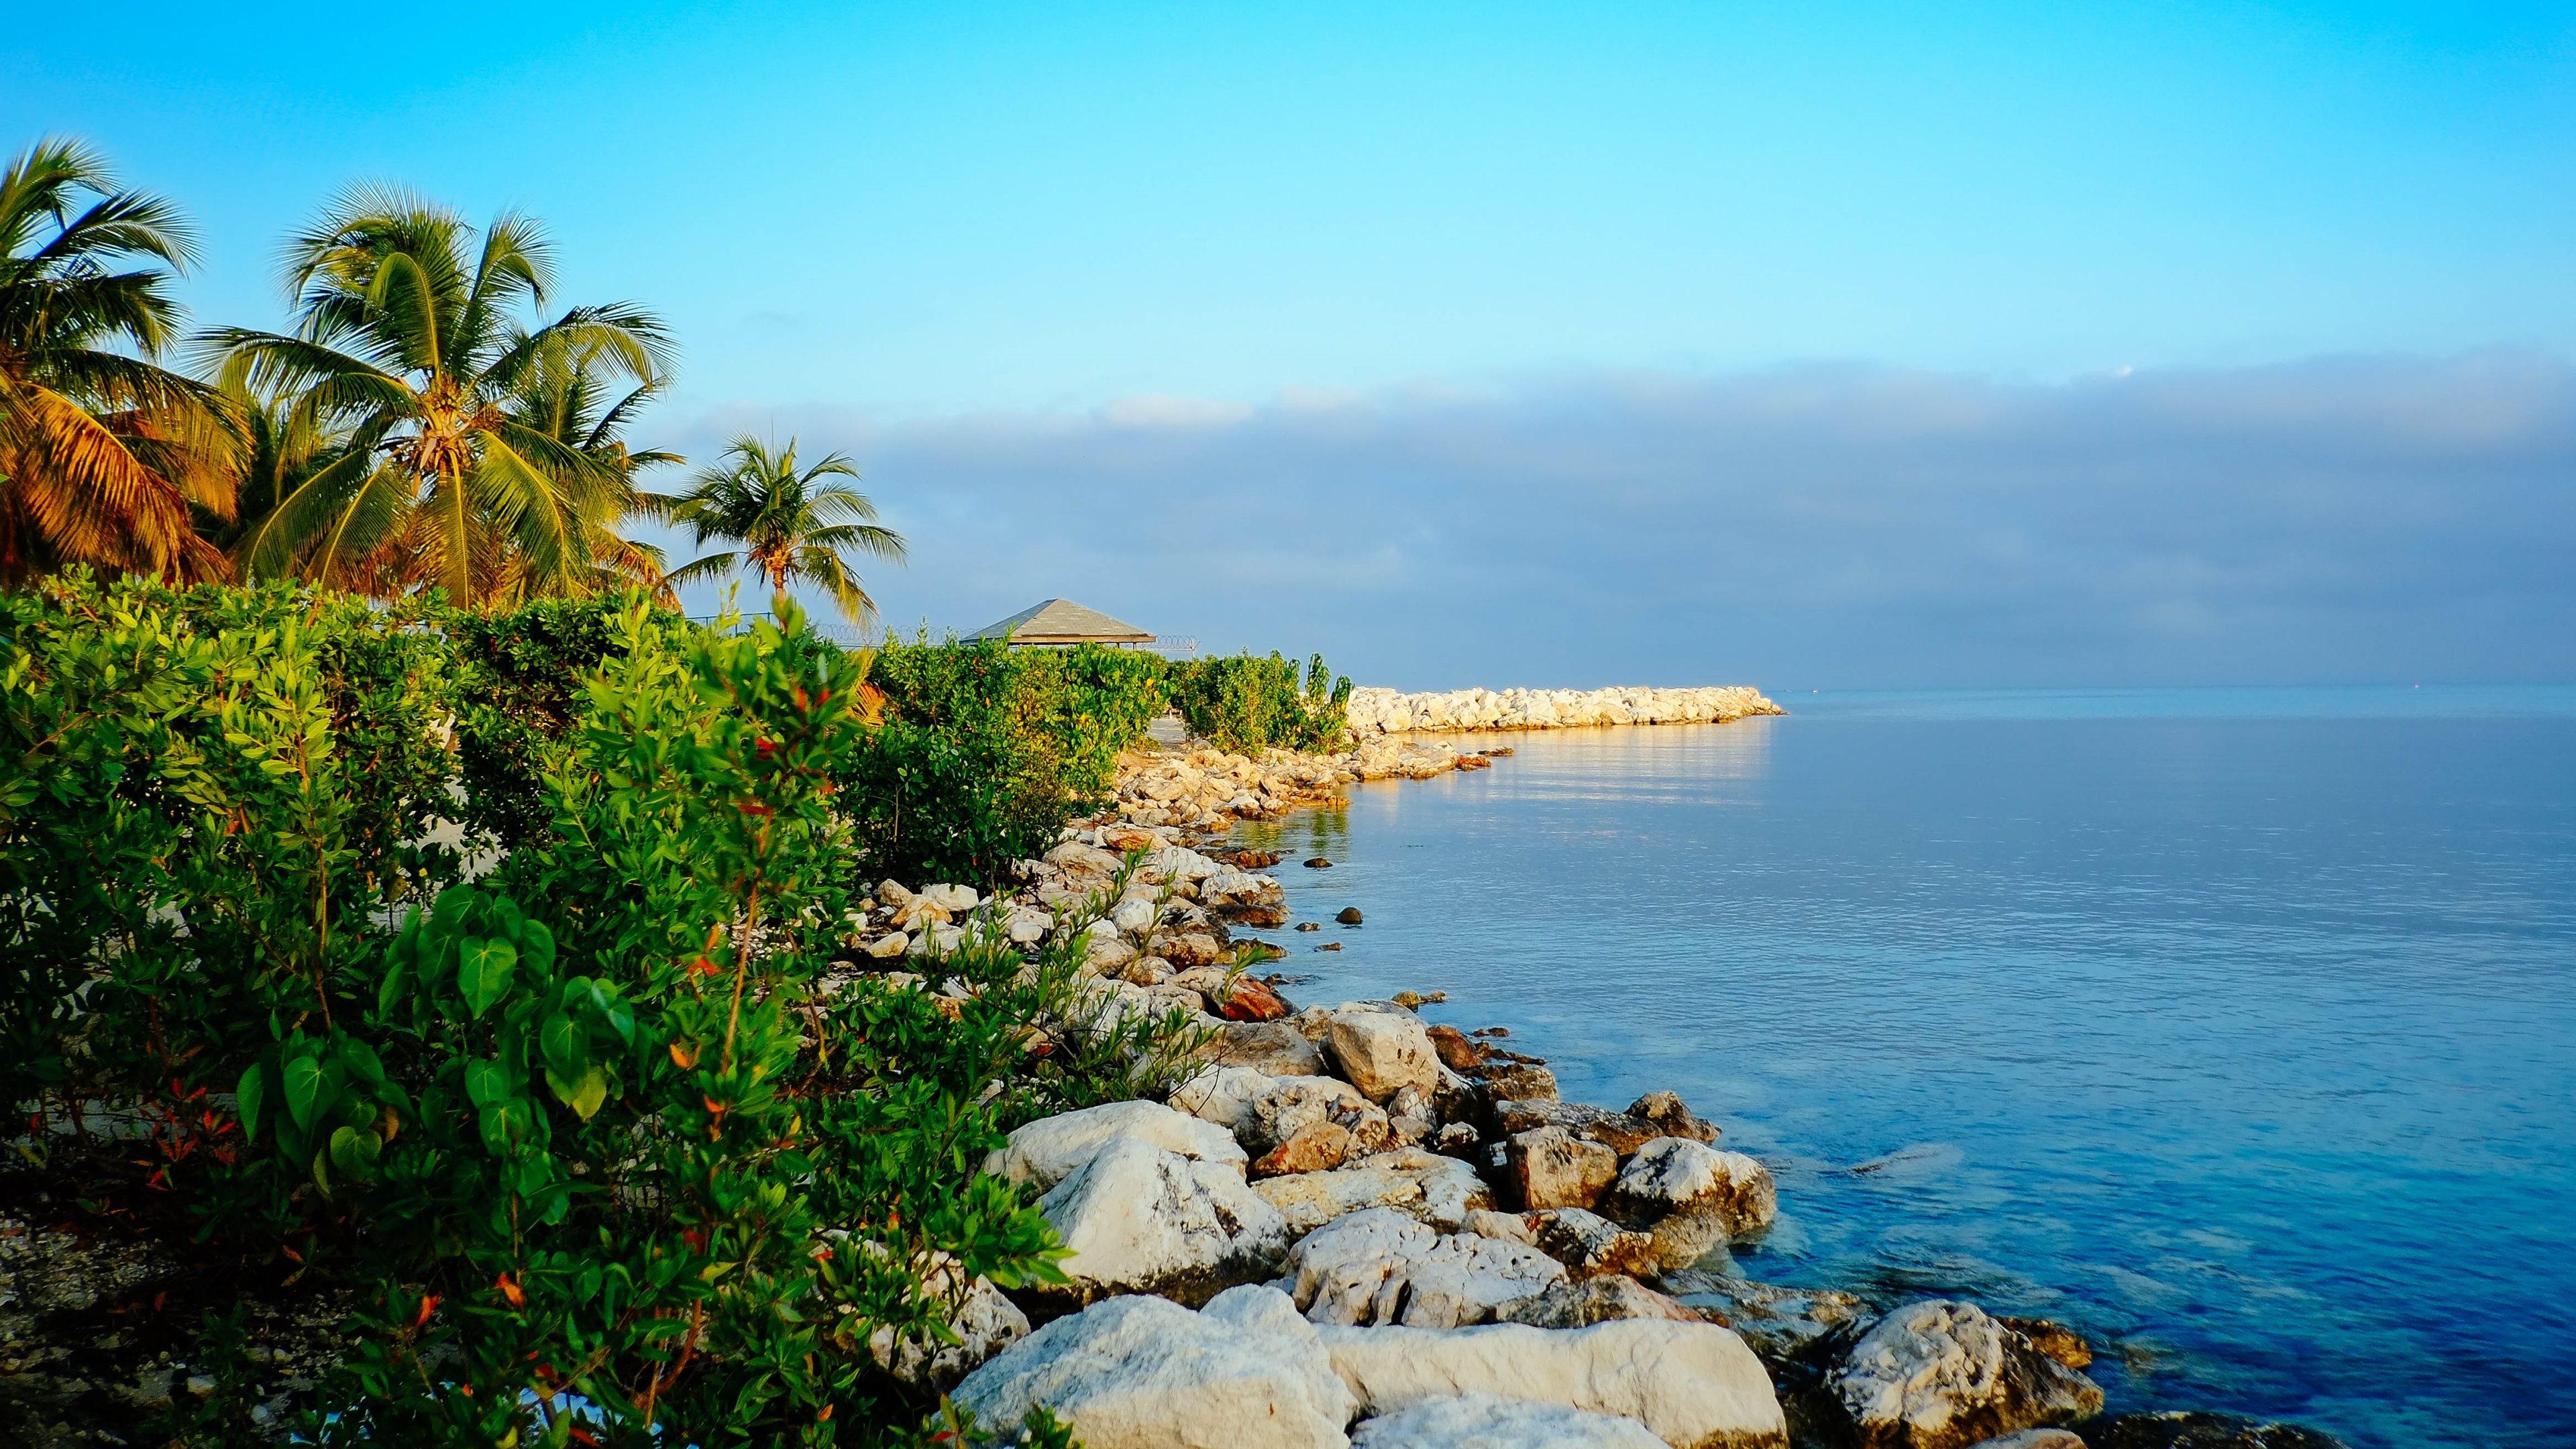 Seascape: The tropical rocky beach, Palm trees and bushes, Blue-water sea. 3840x2160 4K Background.